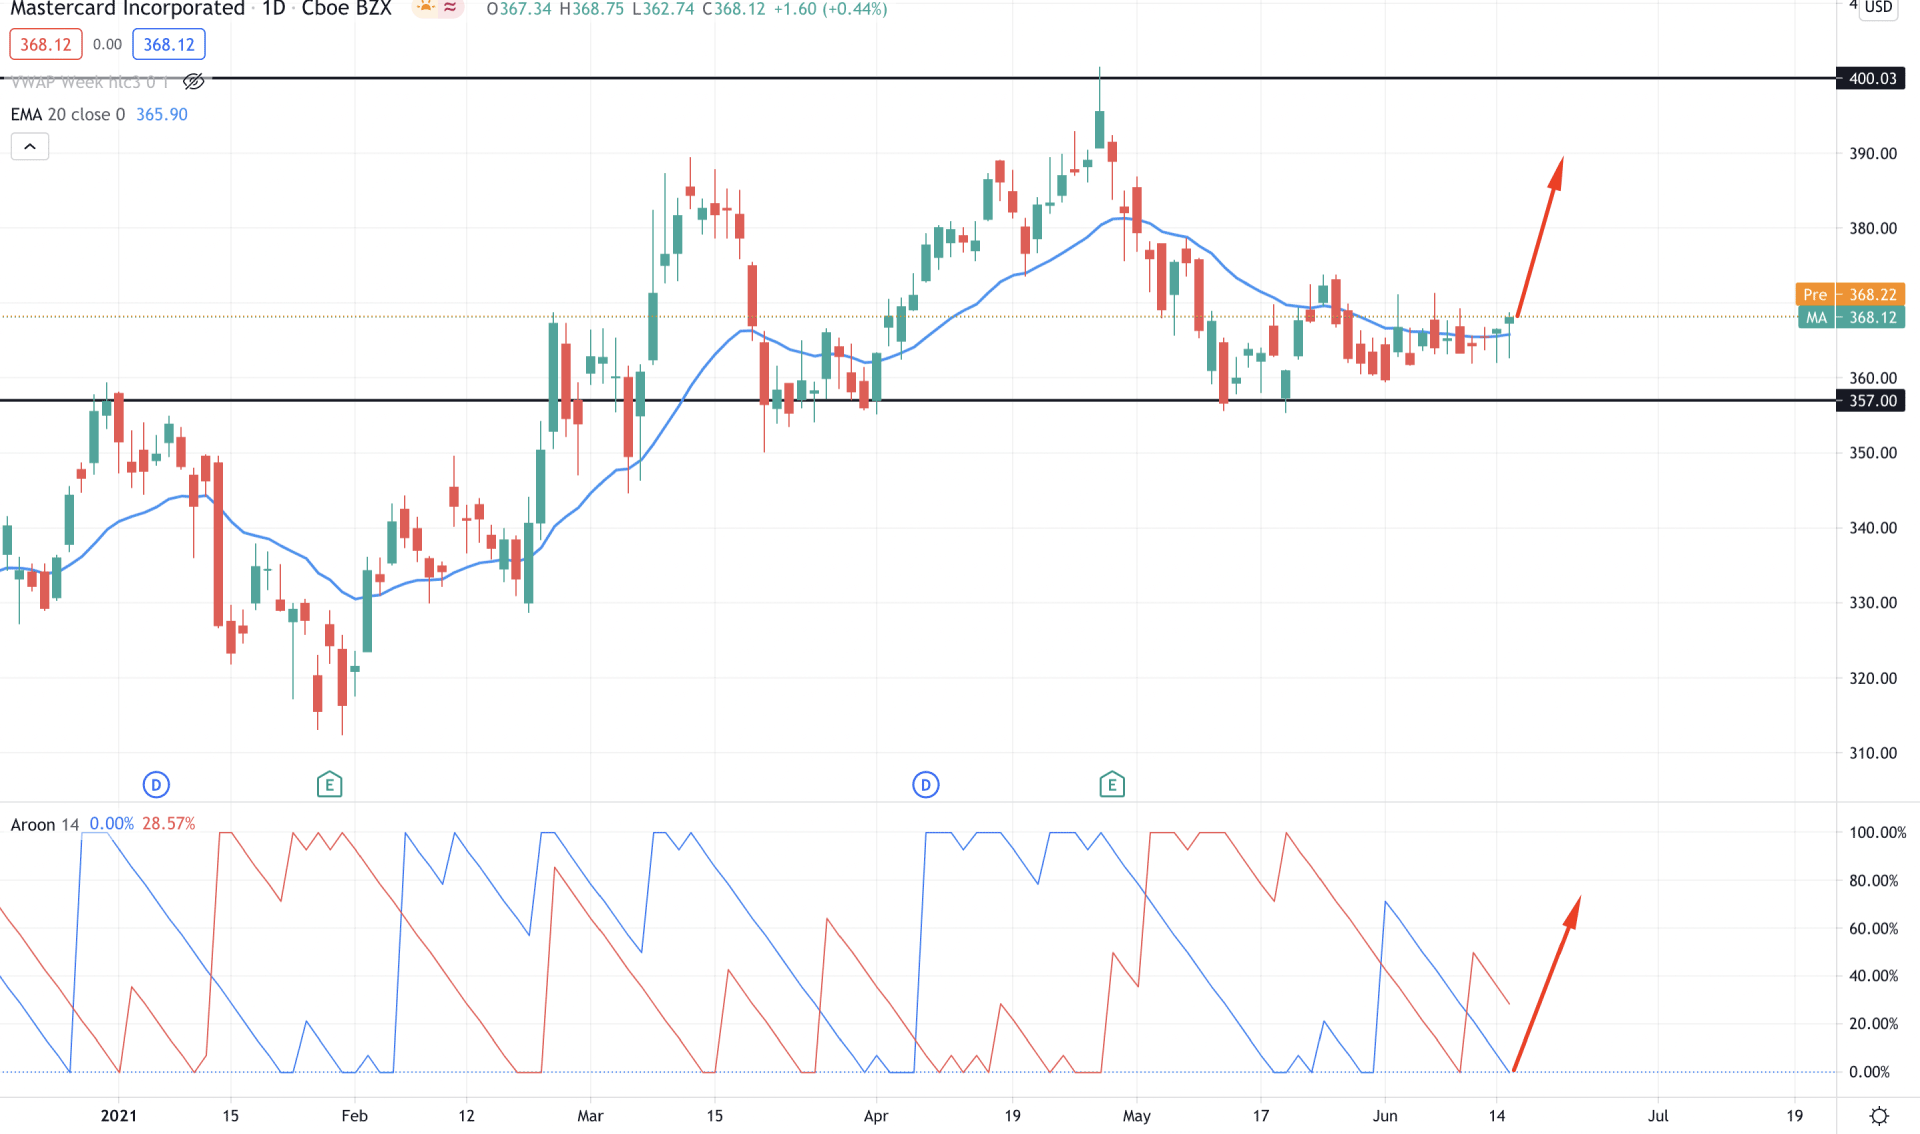 Mastercard Stock Daily Technical Analysis 16 June 2021